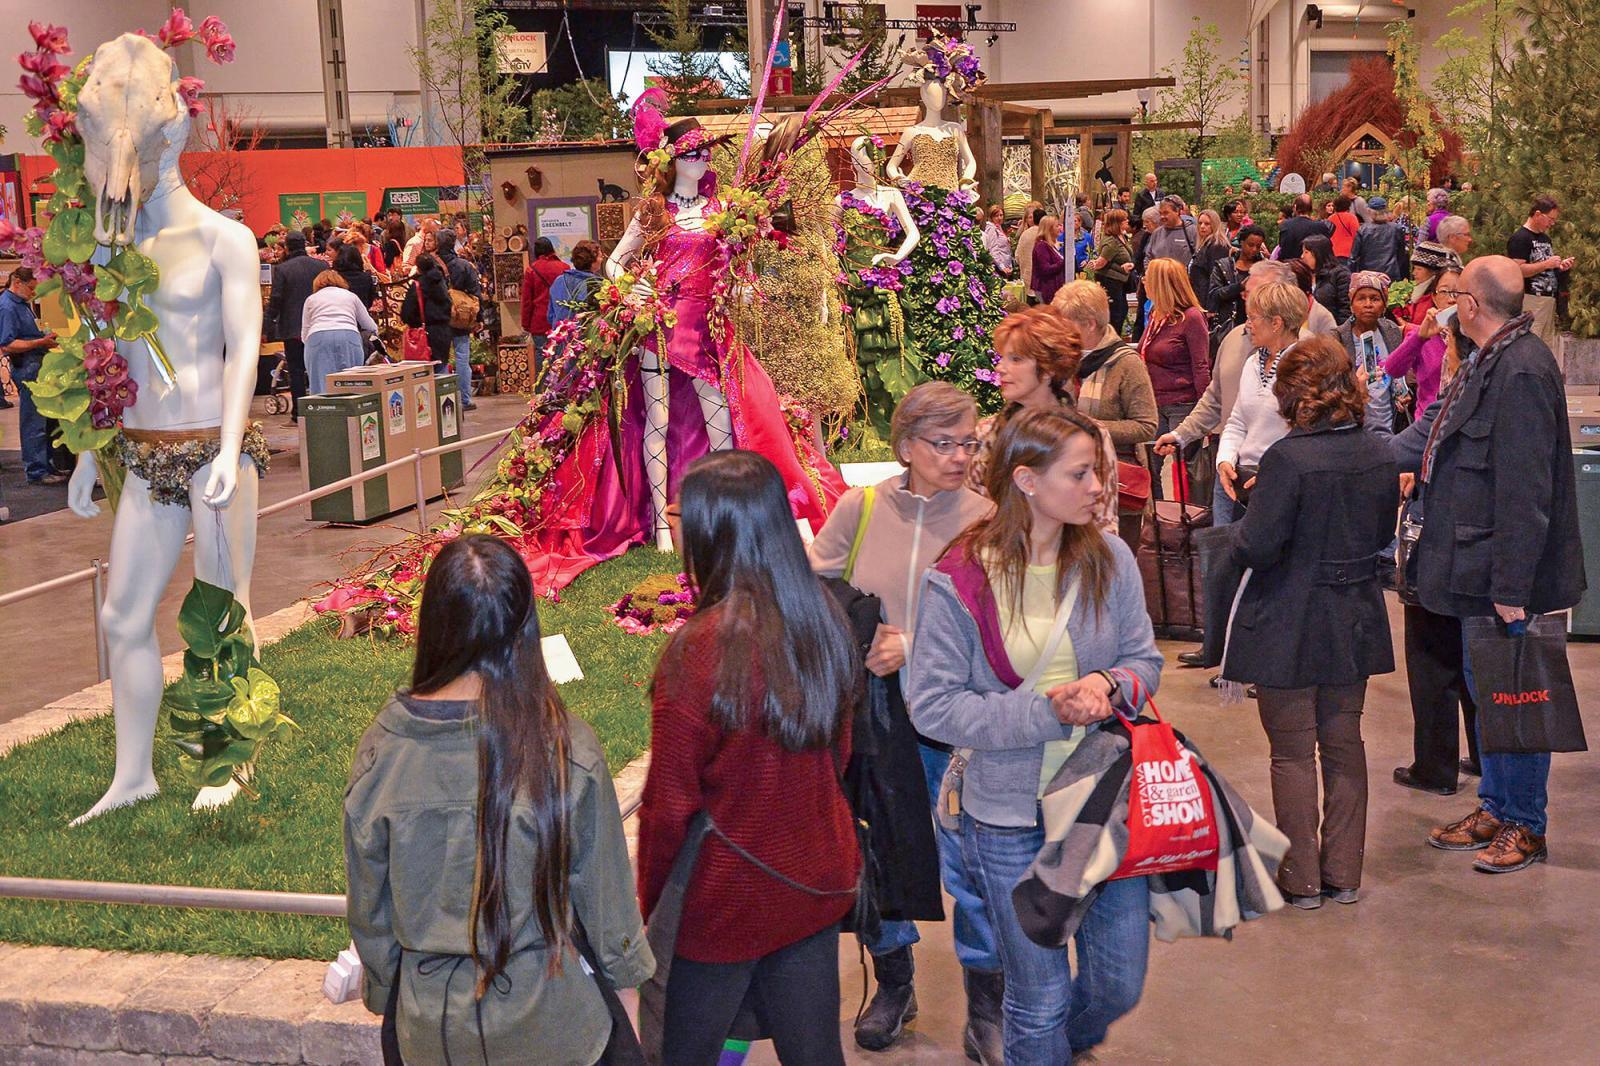 From opening day, Mar. 14, to closing day, Mar. 23, crowds enjoyed the amazing gardens and displays at Canada Blooms. The fashion show of floral clothing was a big hit.